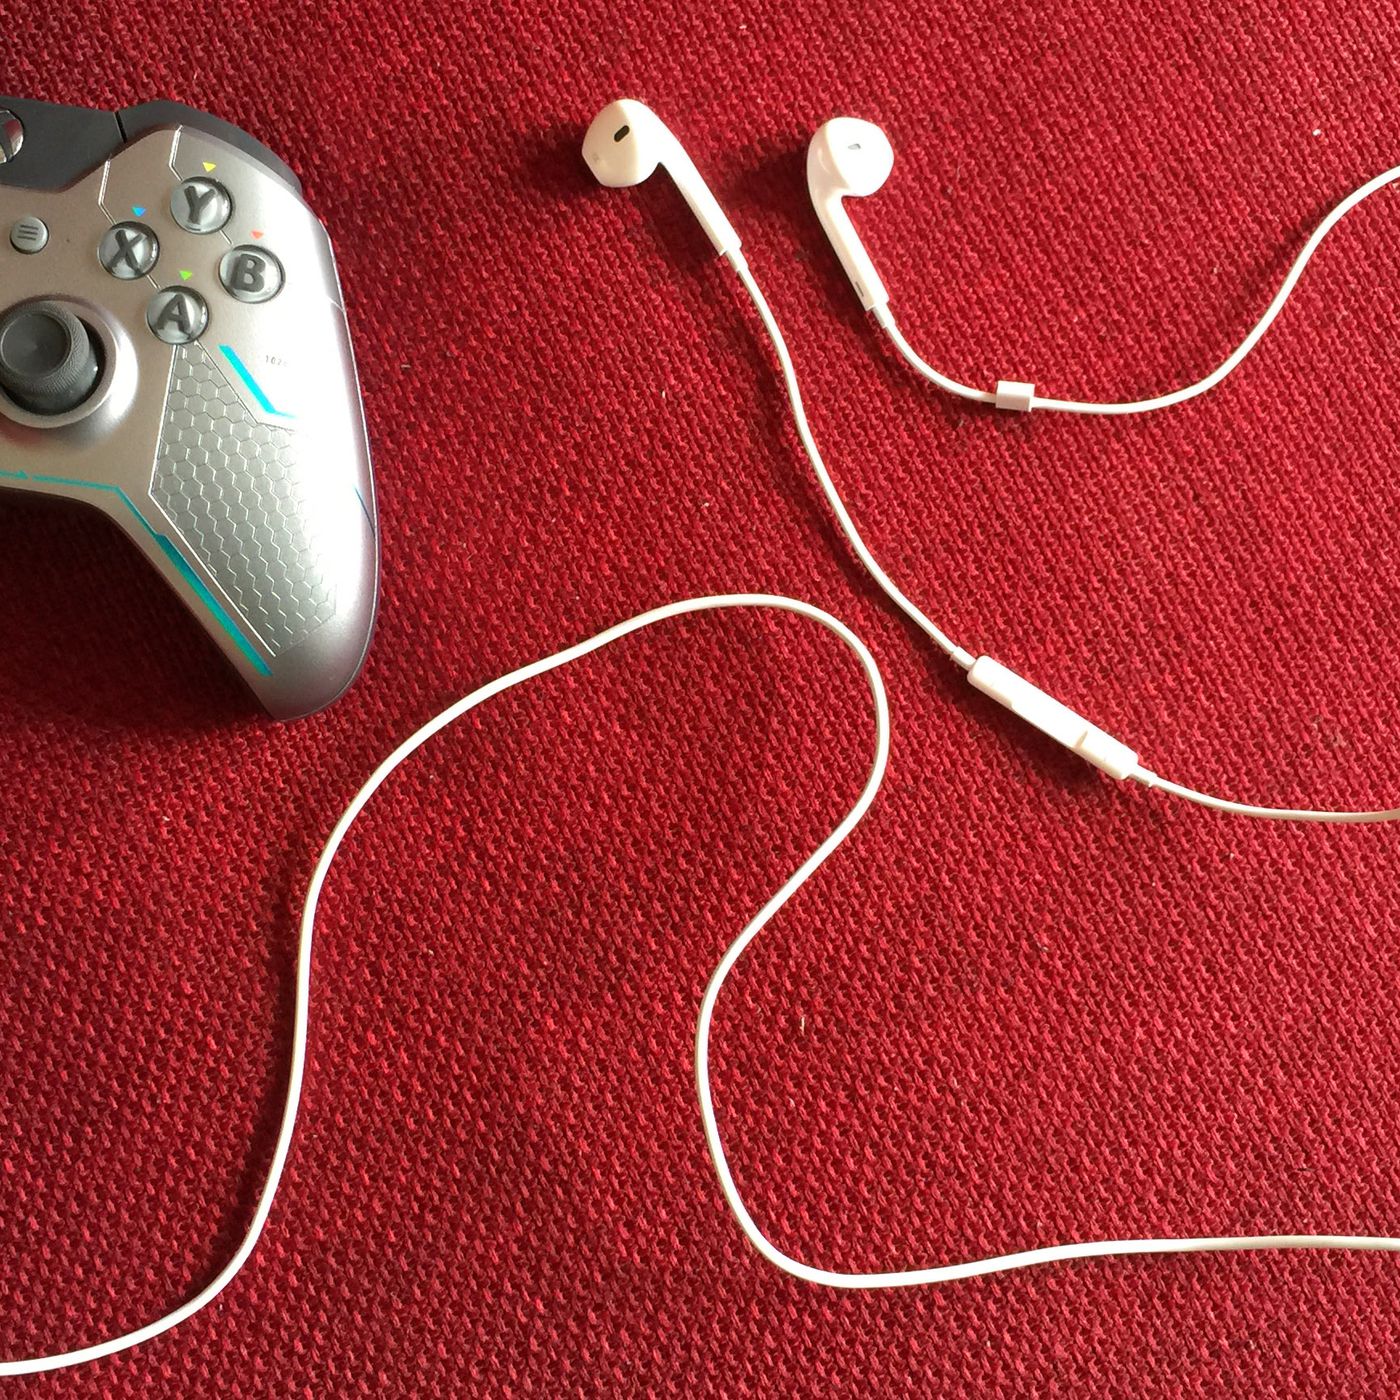 Beg Monumentaal Groot Here's how to use Apple headphones on your Xbox One controller - Polygon